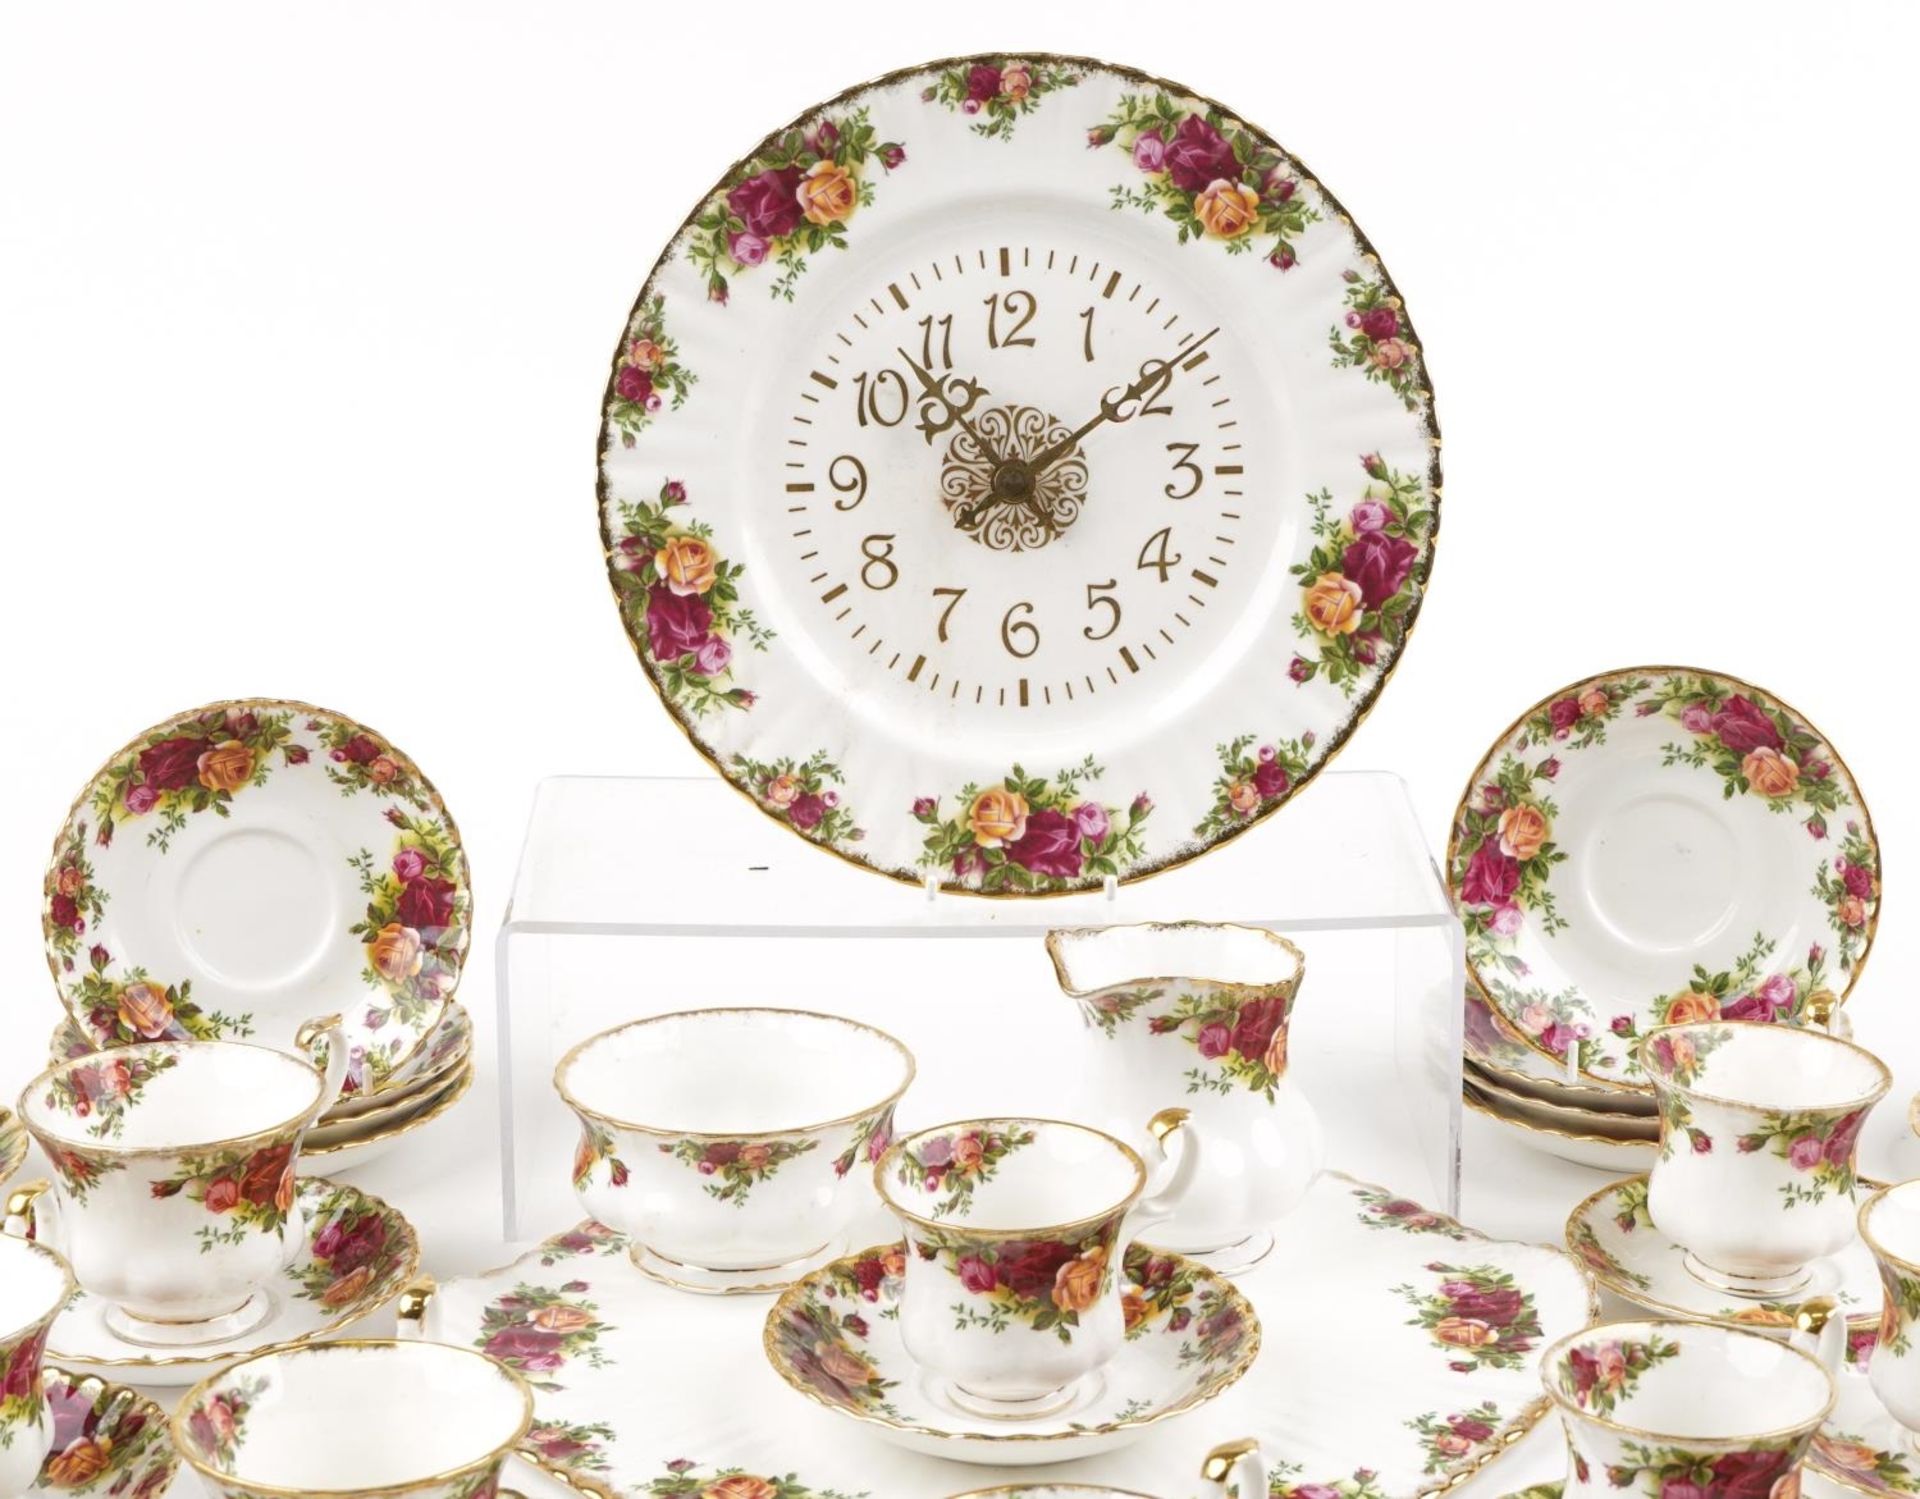 Royal Albert Old Country Roses china including various teaware, wall clock and cake tray, 35cm - Bild 2 aus 5